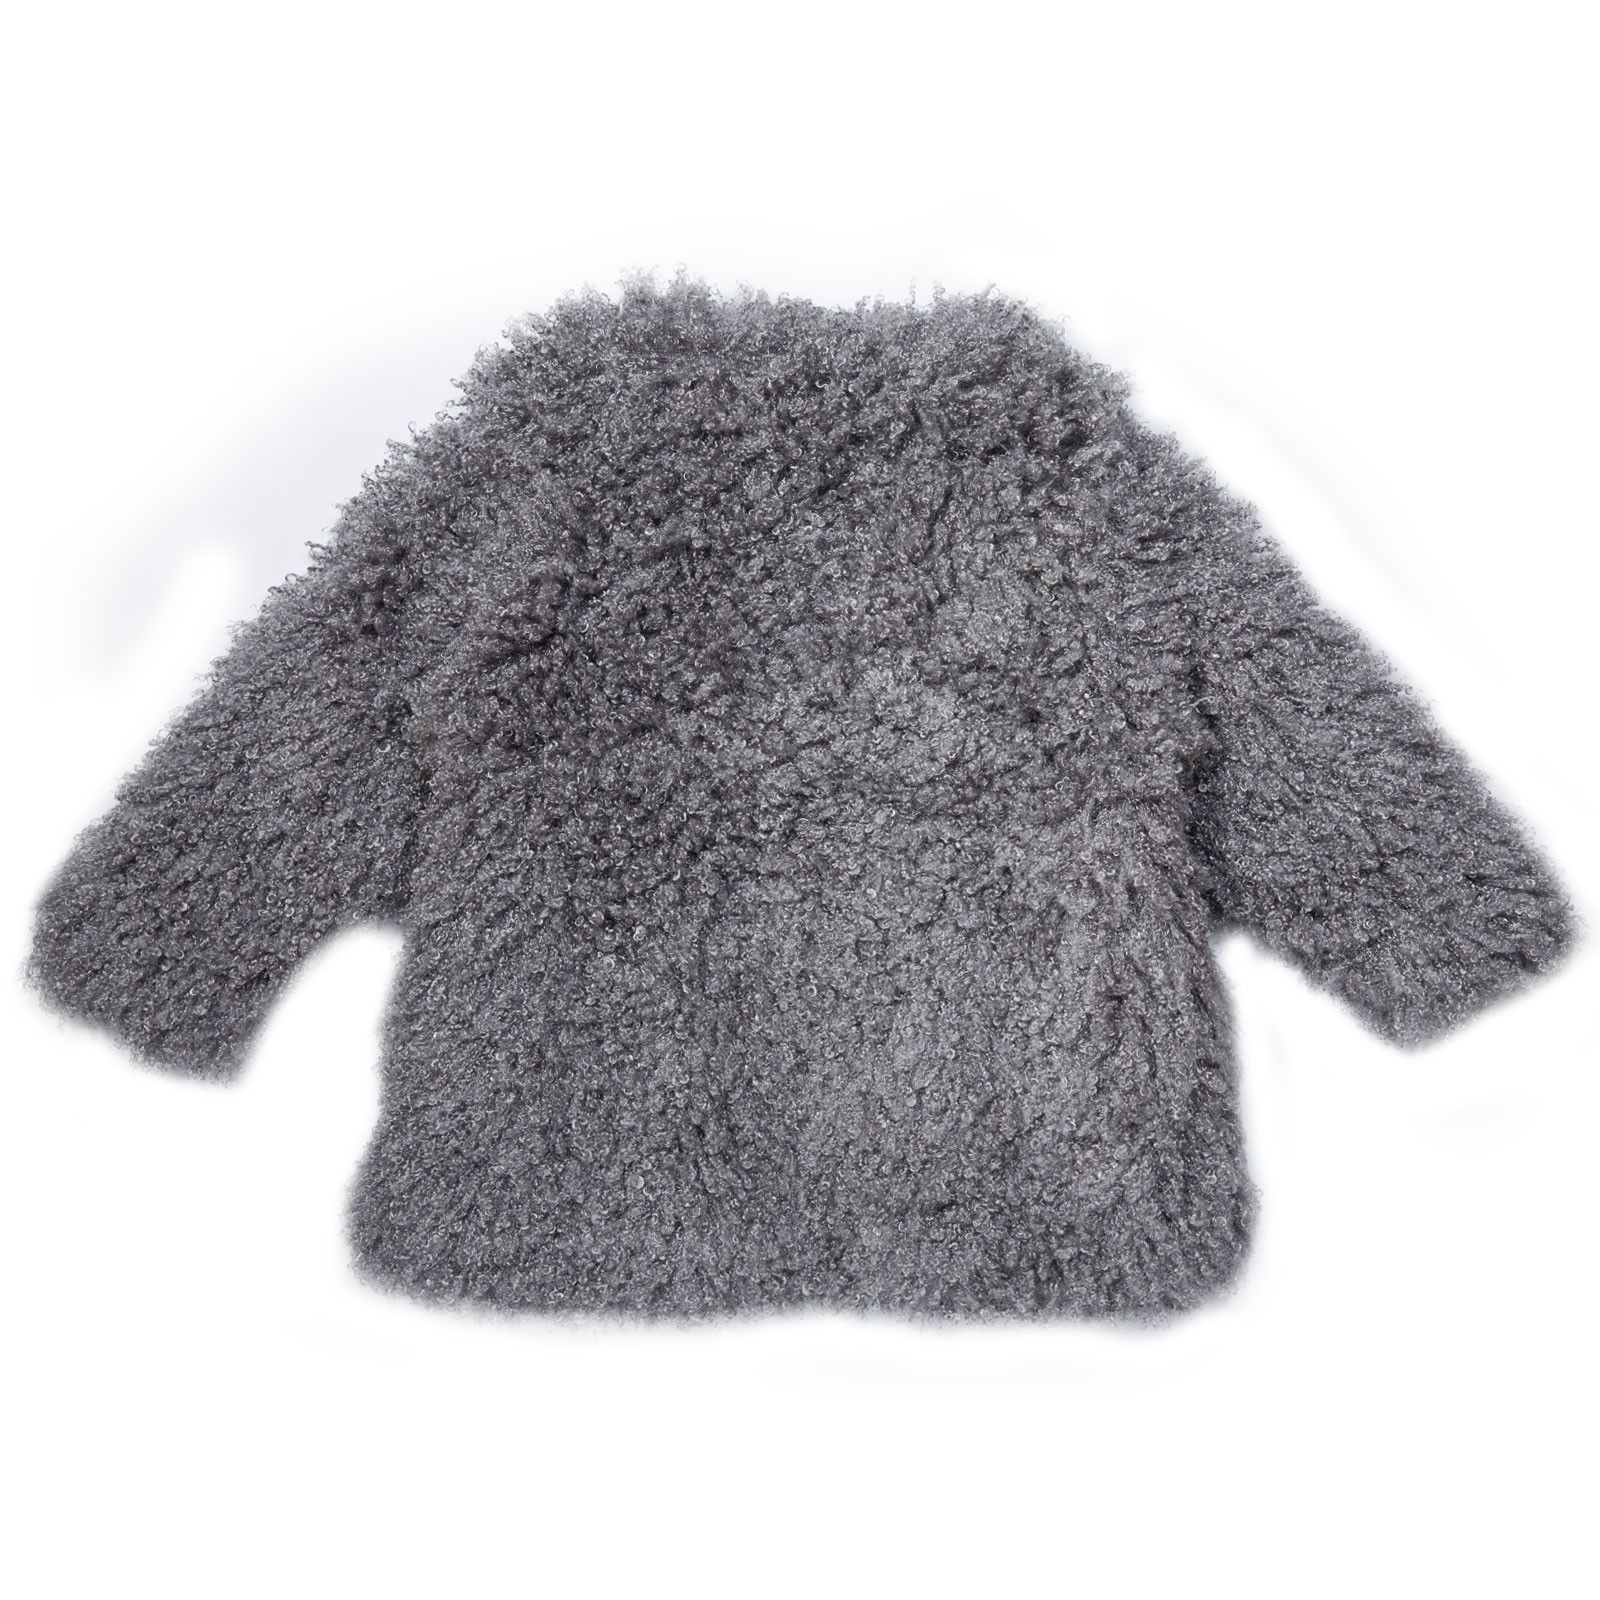 Sparkles Girls Grey Fluffy Coat With Two Pockets - CÉMAROSE | Children's Fashion Store - 2